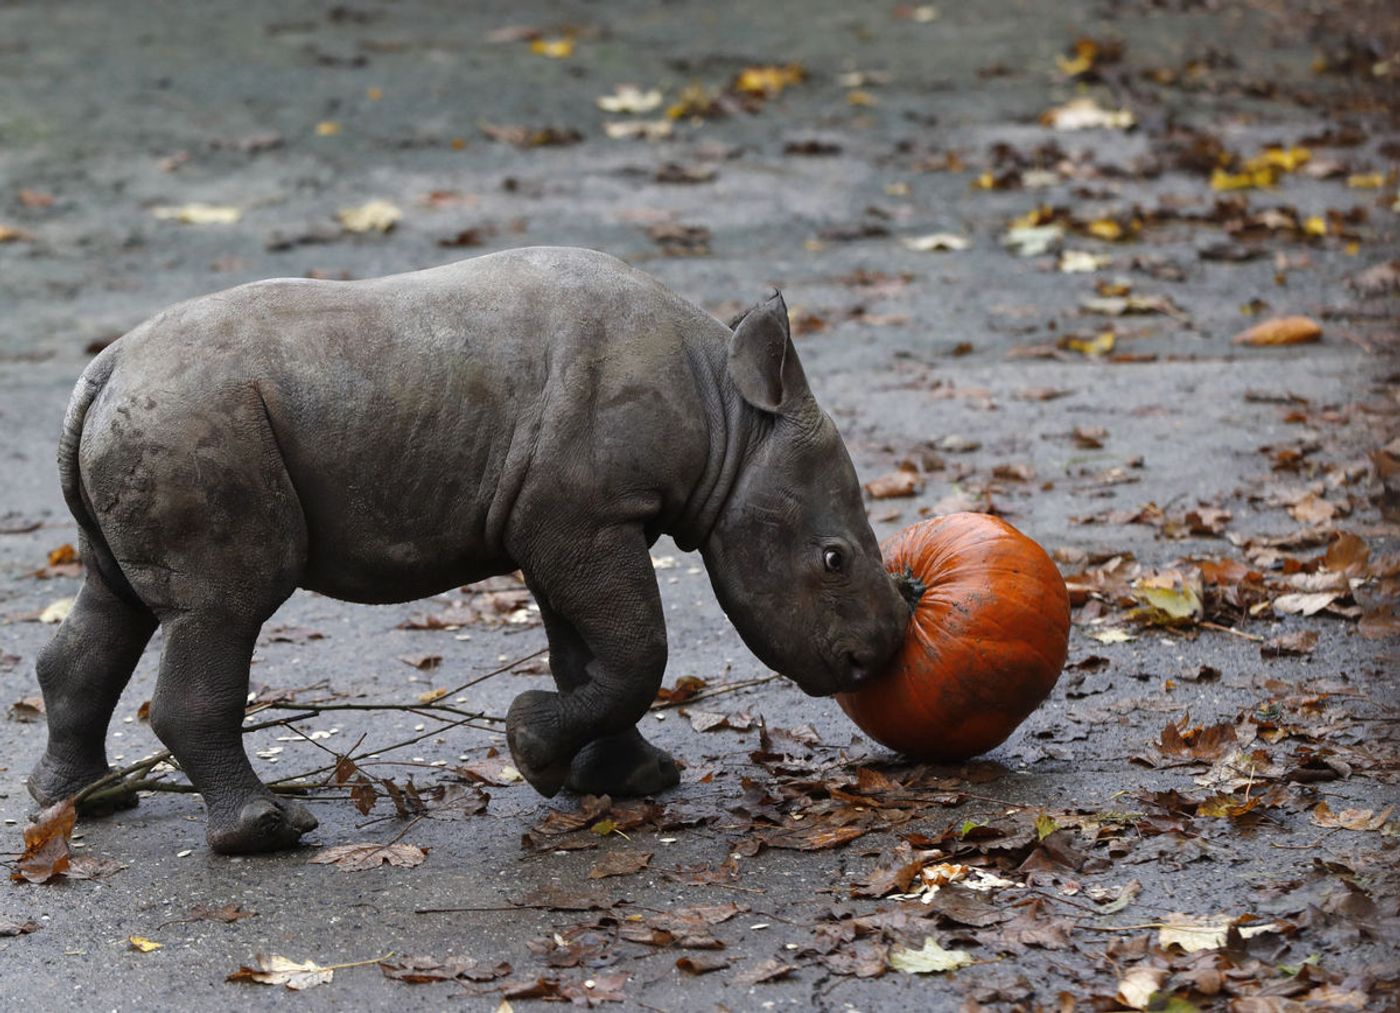 Meet the baby Eastern black rhino calf that just landed at a Czech zoo.